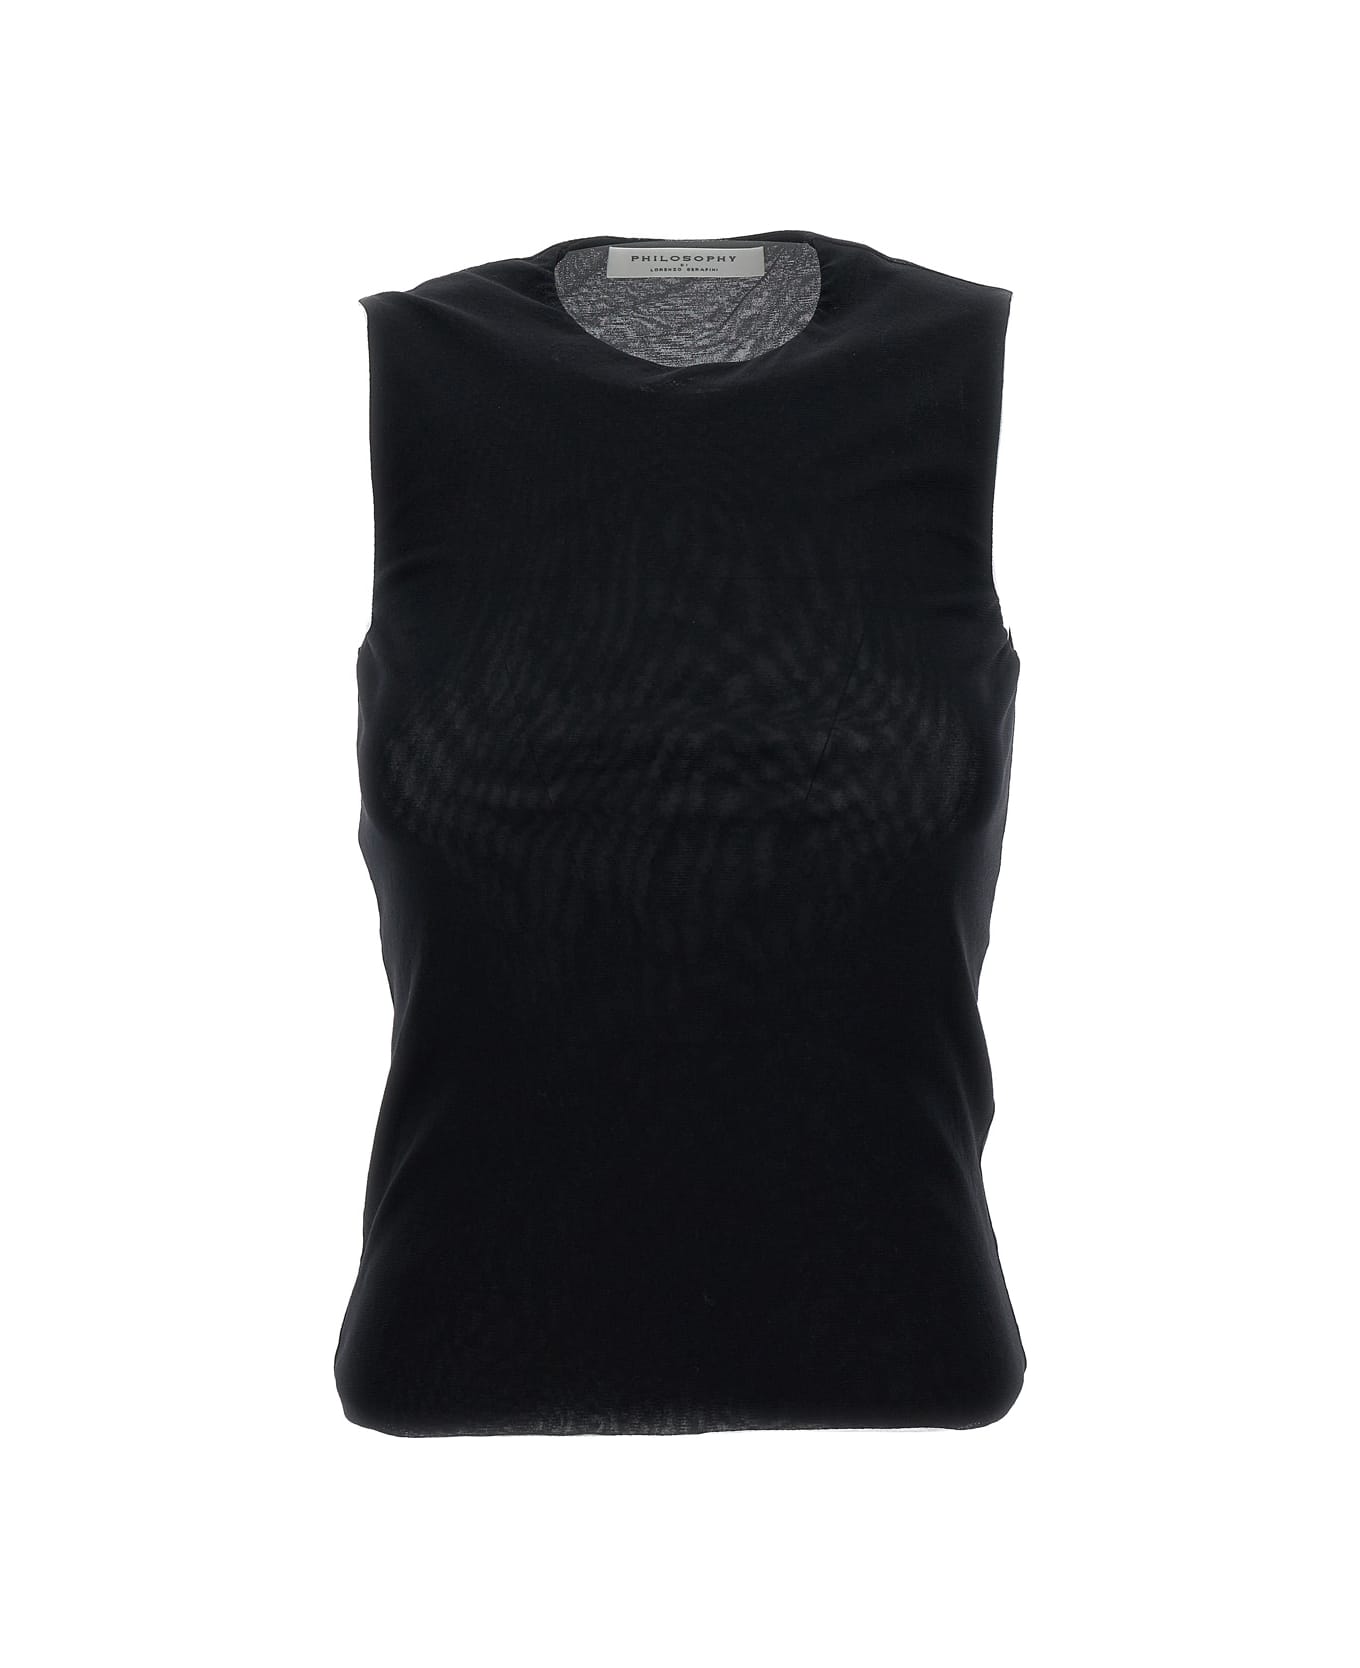 Philosophy di Lorenzo Serafini Black Sleeveless Top With Round Neck In Stretch Fabric Woman - Black トップス